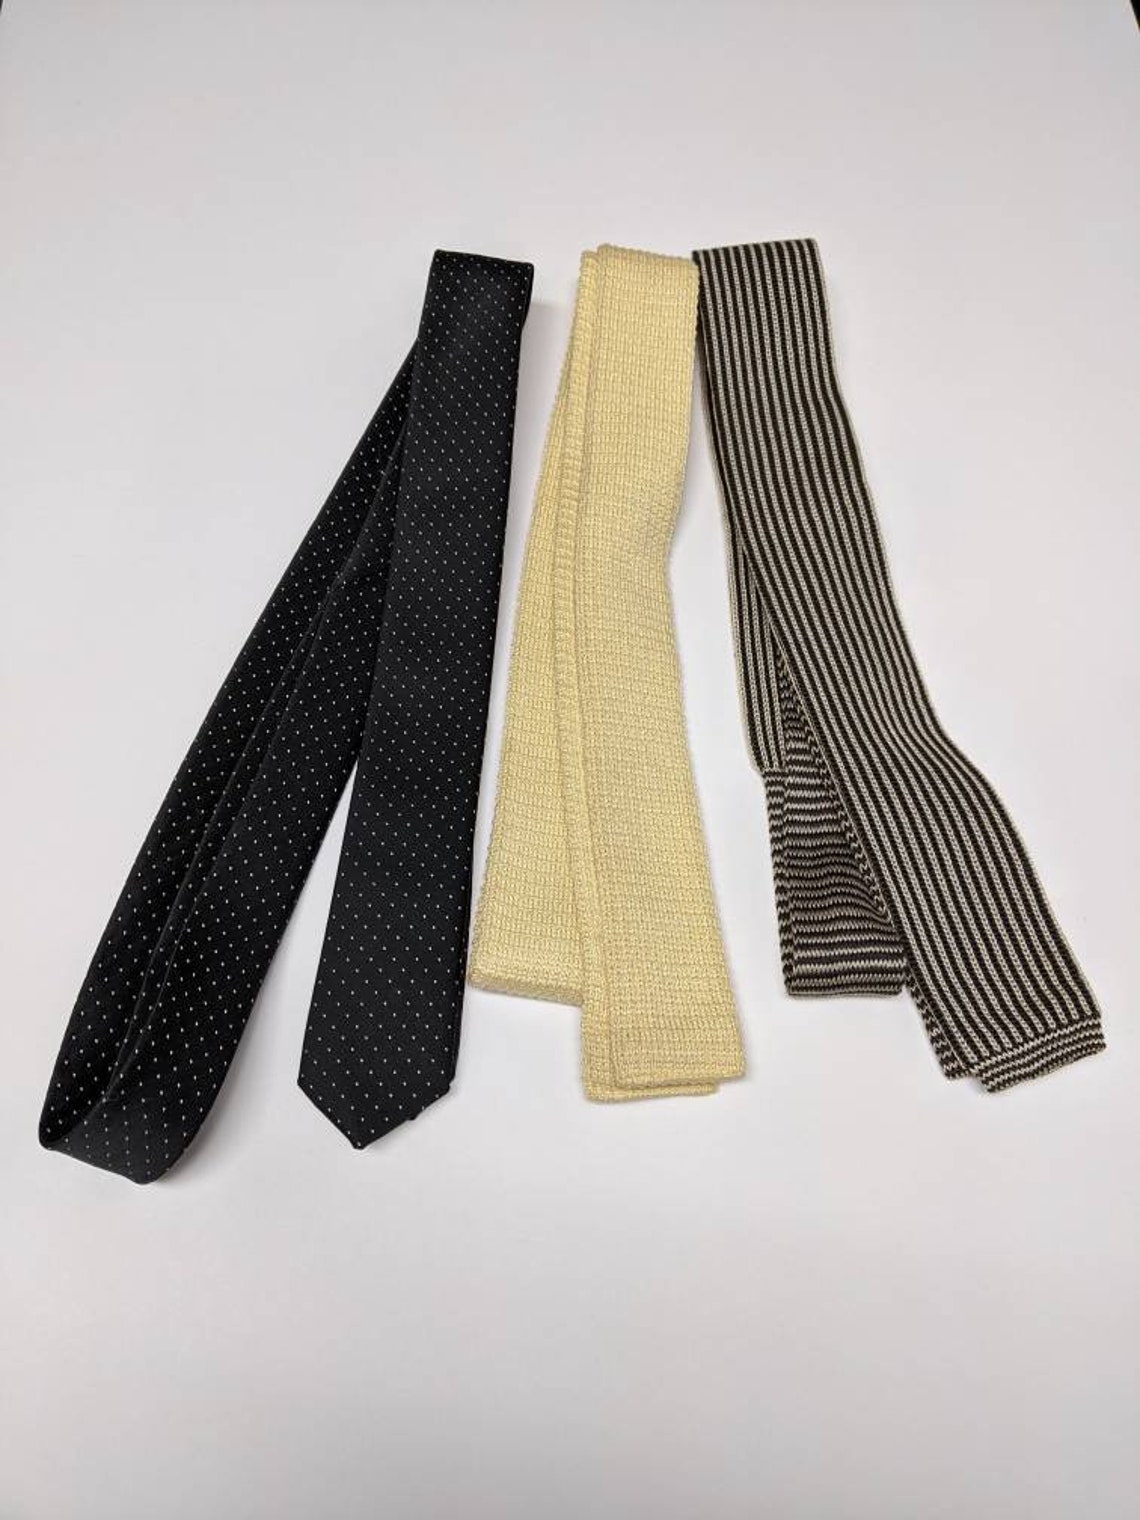 80s Skinny Ties Lot of 3 yellow cotton Brown thin stripe | Etsy